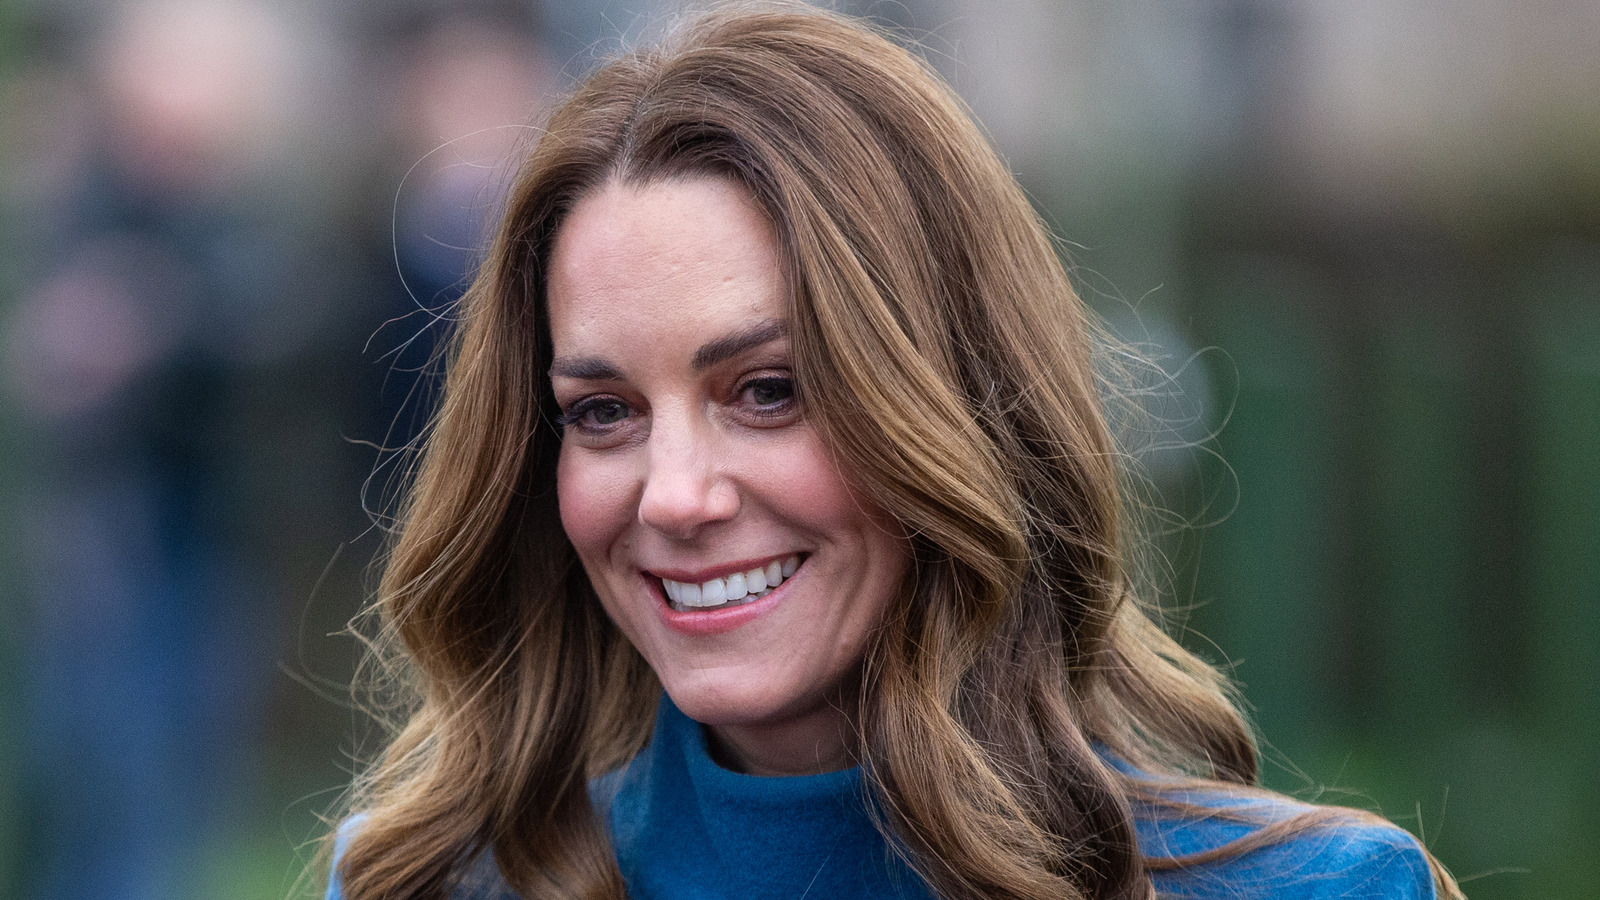 Why Kate Middleton replaced Carole as George's babysitter